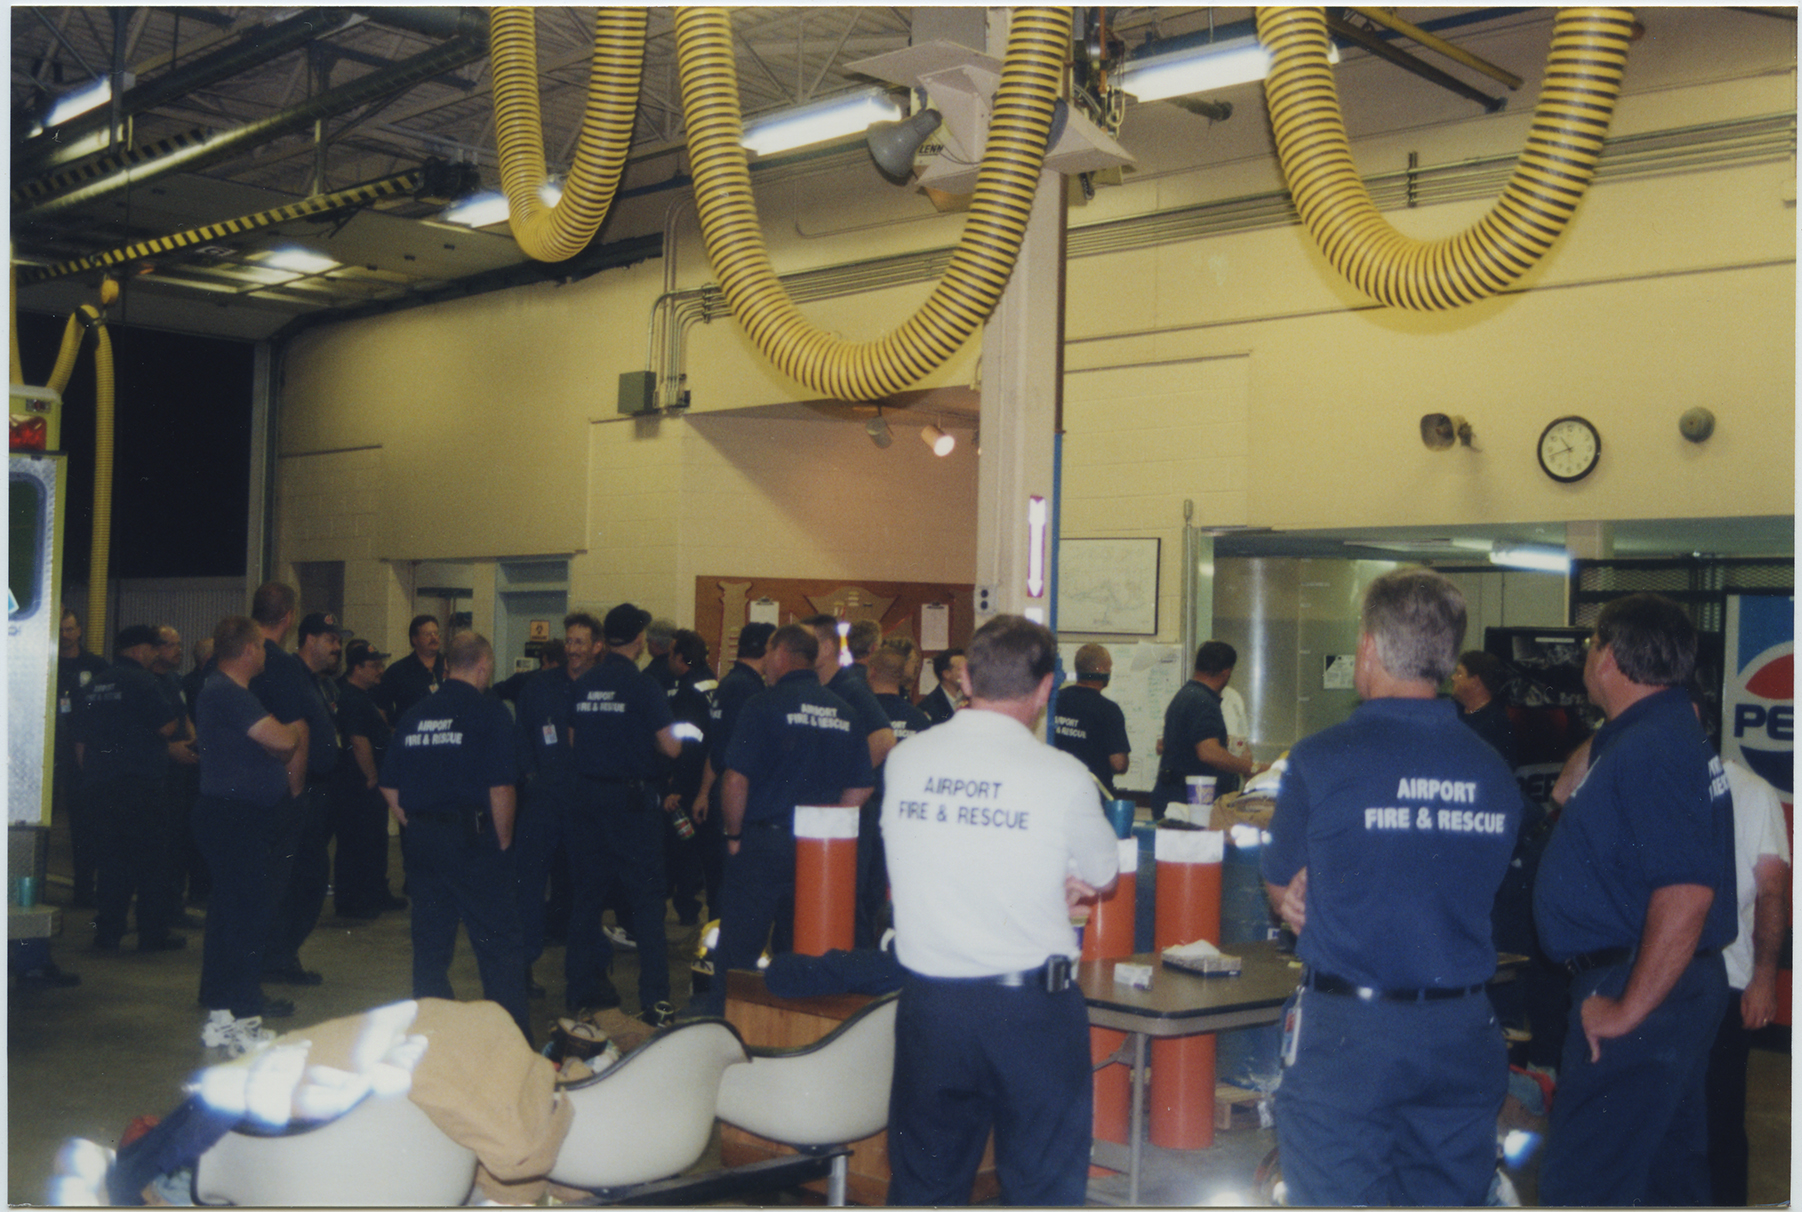 Fire fighters taking a much needed break at the National Airport fire station at 10pm on September 11, after a day long rescue effort at the Pentagon following the attacks. 2001, 1 print, col., 4 x 6 in..